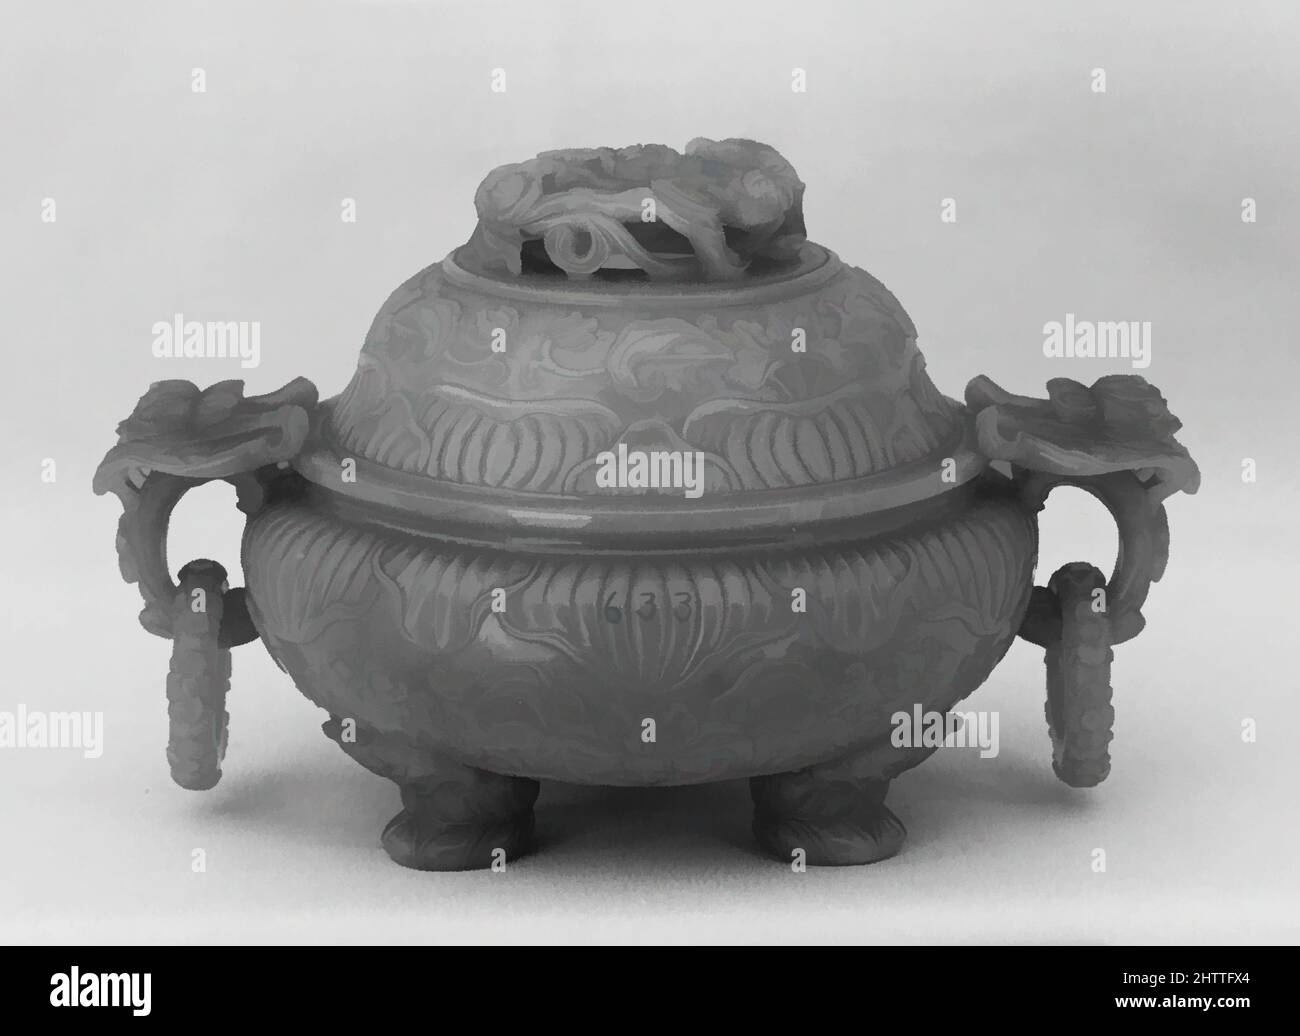 Art inspired by Incense burner with cover, Qing dynasty (1644–1911), Qianlong period (1736–95), China, Nephrite, very light grey with an exceedingly faint greenish tint, H. 3 7/8 in. (9.9 cm); W. 6 5/16 in. (16 cm), Jade, Classic works modernized by Artotop with a splash of modernity. Shapes, color and value, eye-catching visual impact on art. Emotions through freedom of artworks in a contemporary way. A timeless message pursuing a wildly creative new direction. Artists turning to the digital medium and creating the Artotop NFT Stock Photo